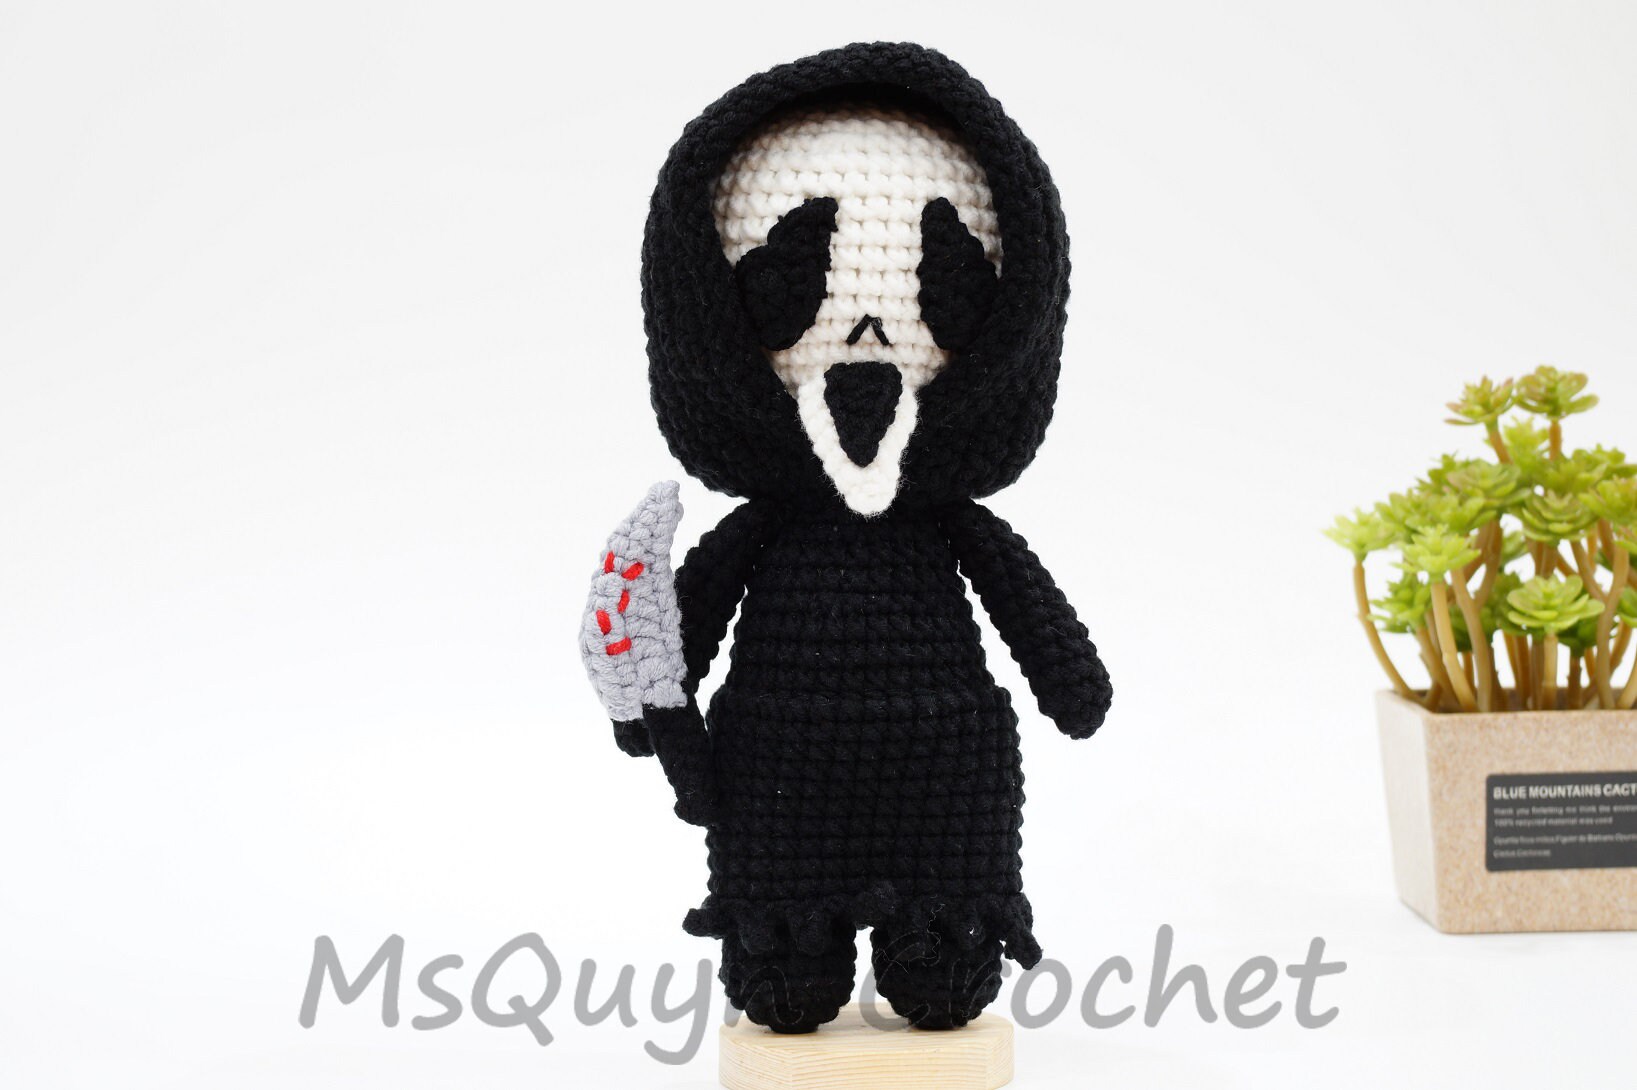 6.7'' Screaming Ghostface Plush Toy,Monster Horror Killers Plushies Figure  Doll Toys Scary Ghost Stuffed Plush Toy Movies Fan Gift 